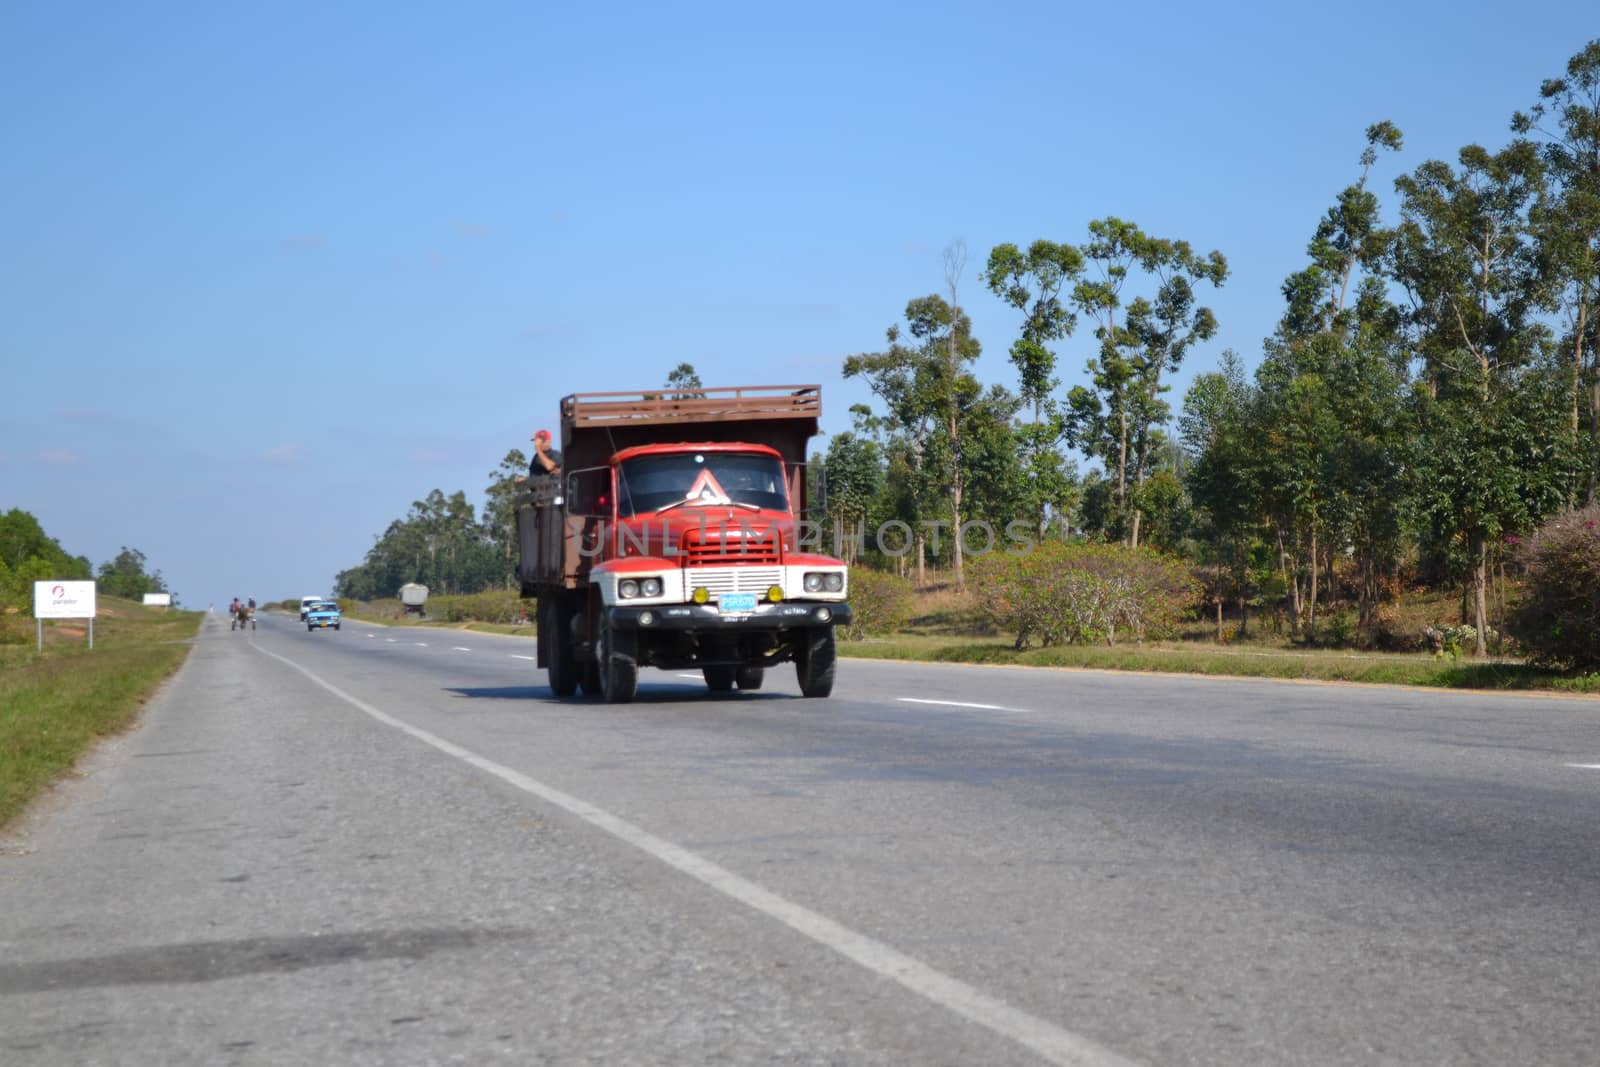 Cuban old timer truck on the road with traffic in the blurred distance by kb79